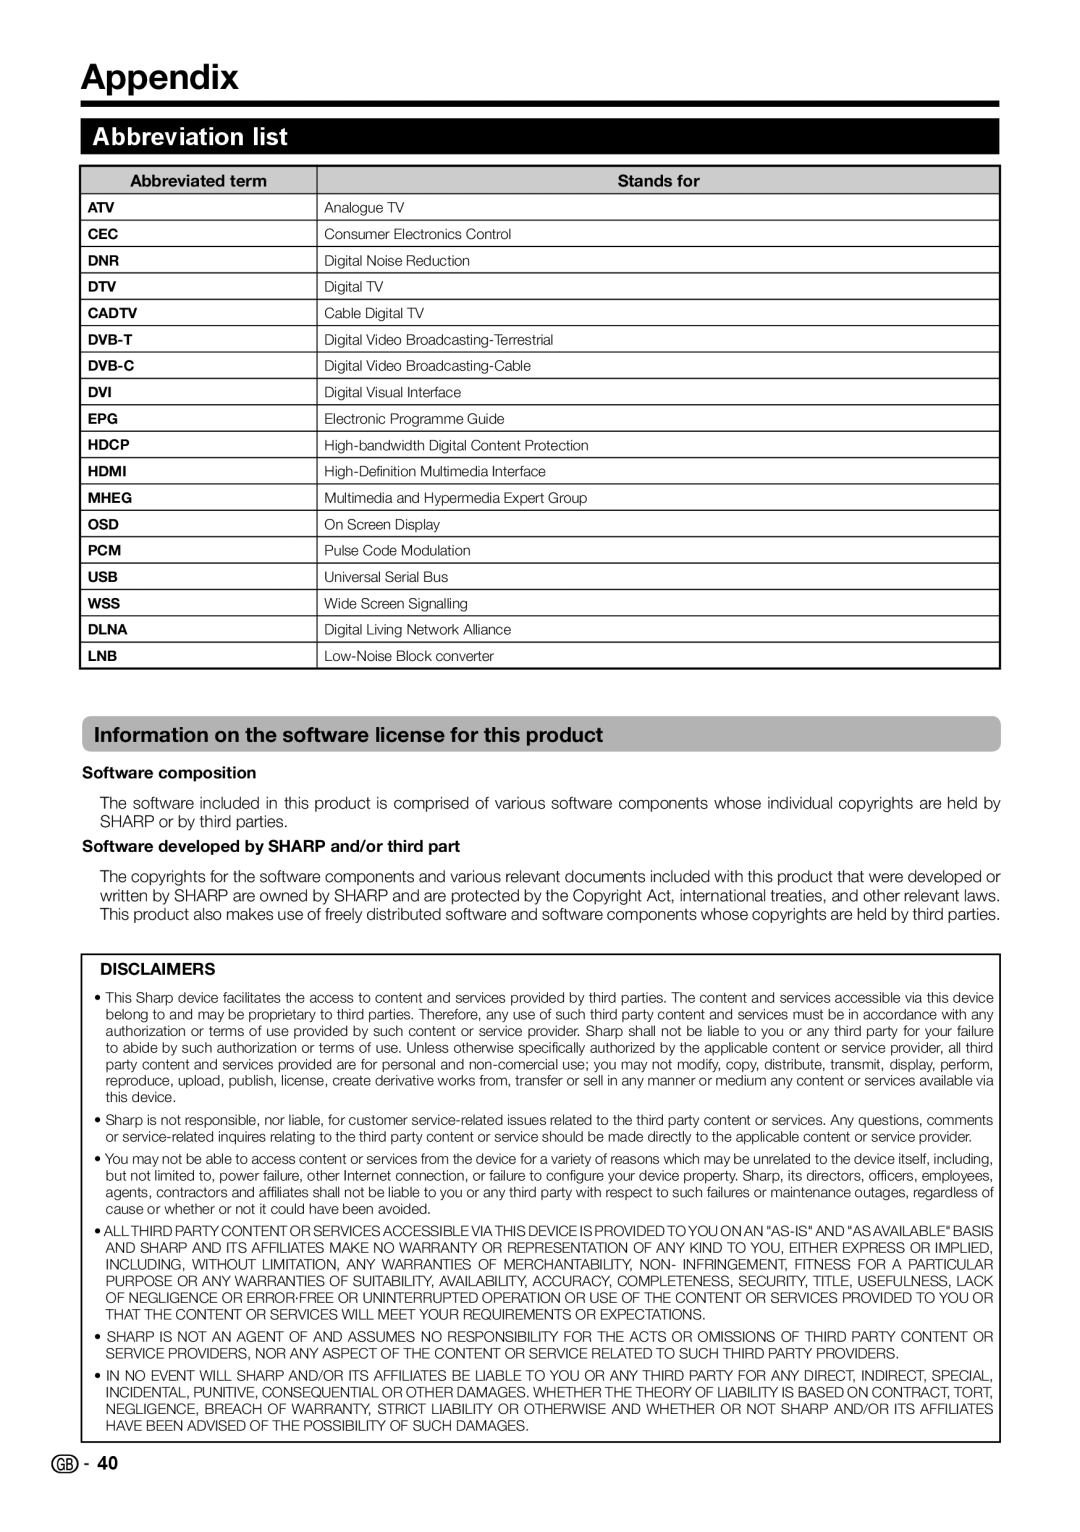 Sharp LC-40LE730E Appendix, Abbreviation list, Information on the software license for this product, Abbreviated term 